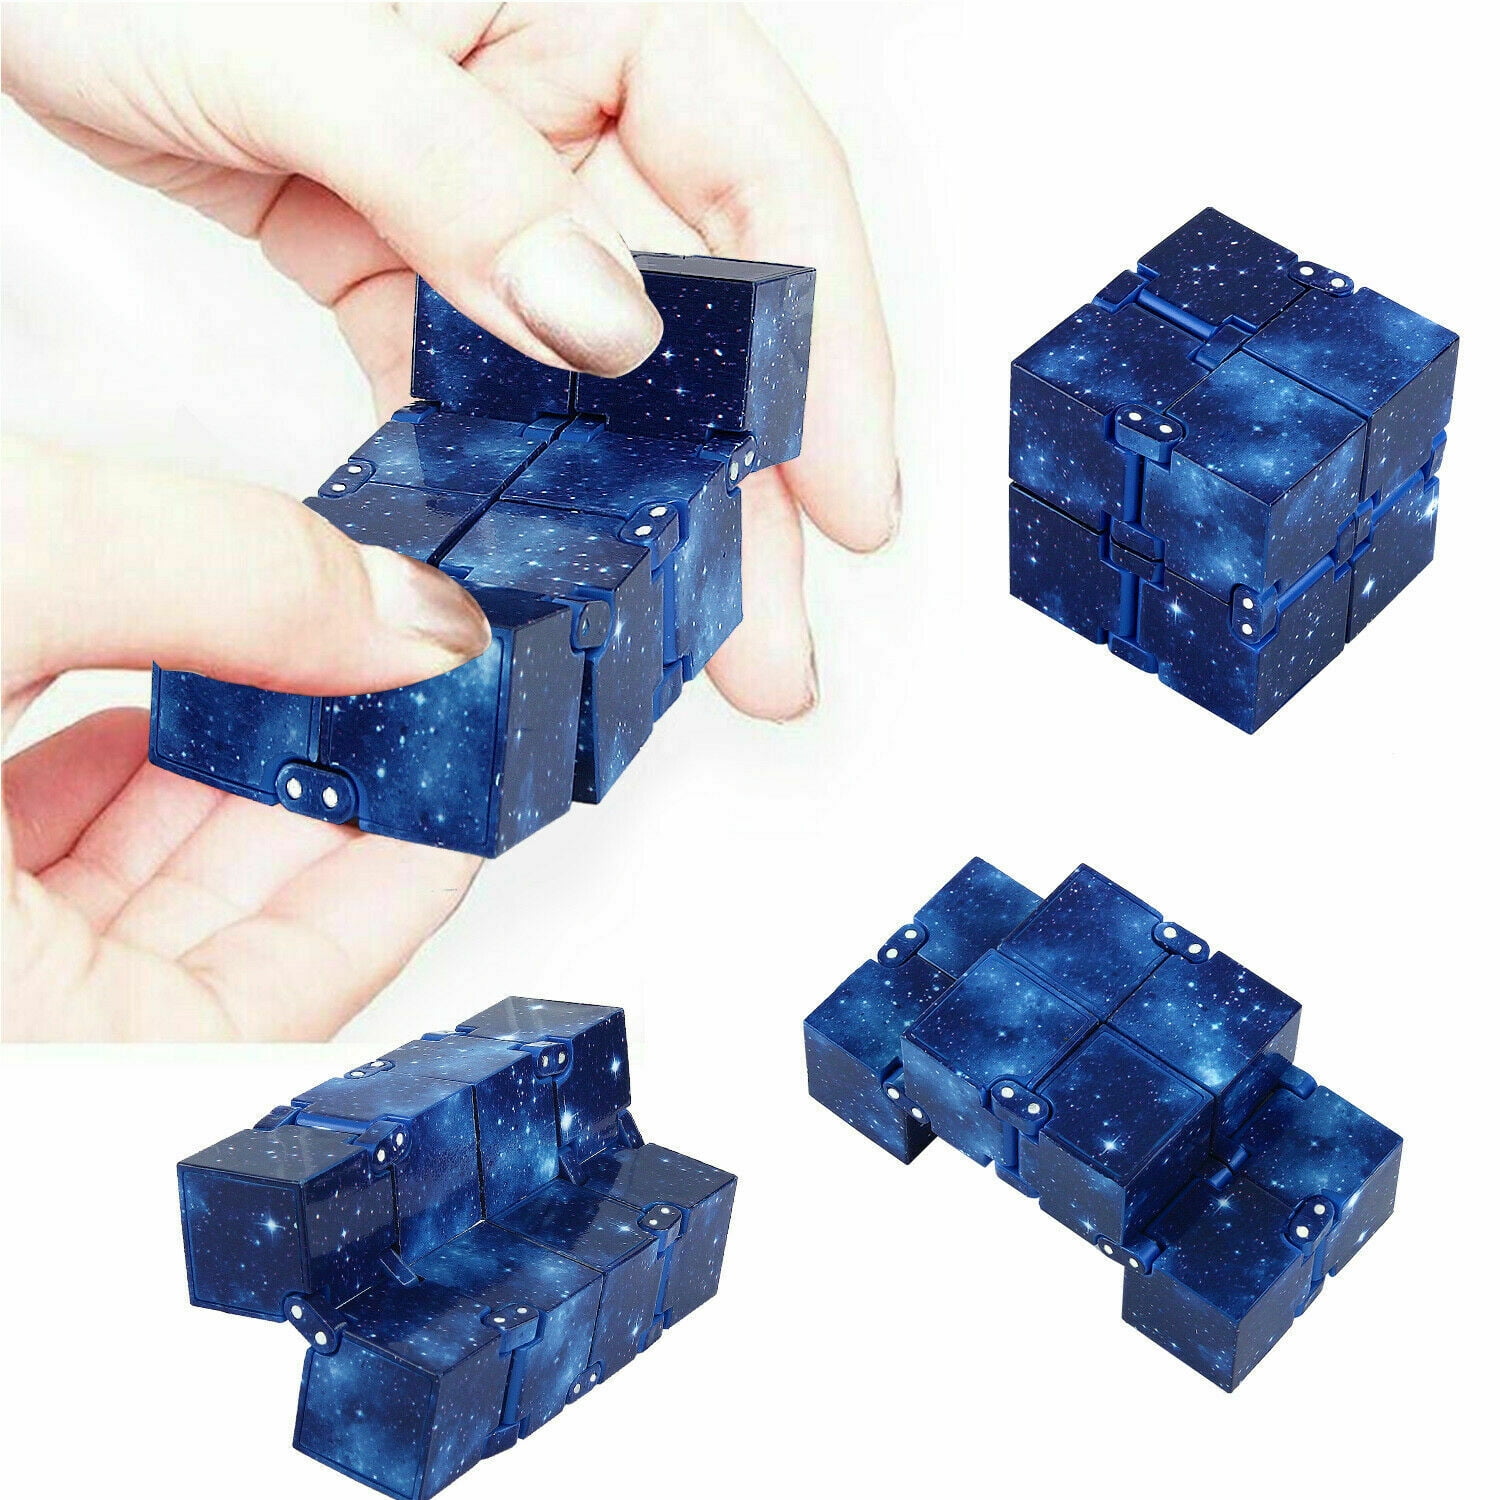 New Fun Fidget 6 Sided Cube Adult Anxiety Stress Relief Cube Toys Gift Cubes UK 